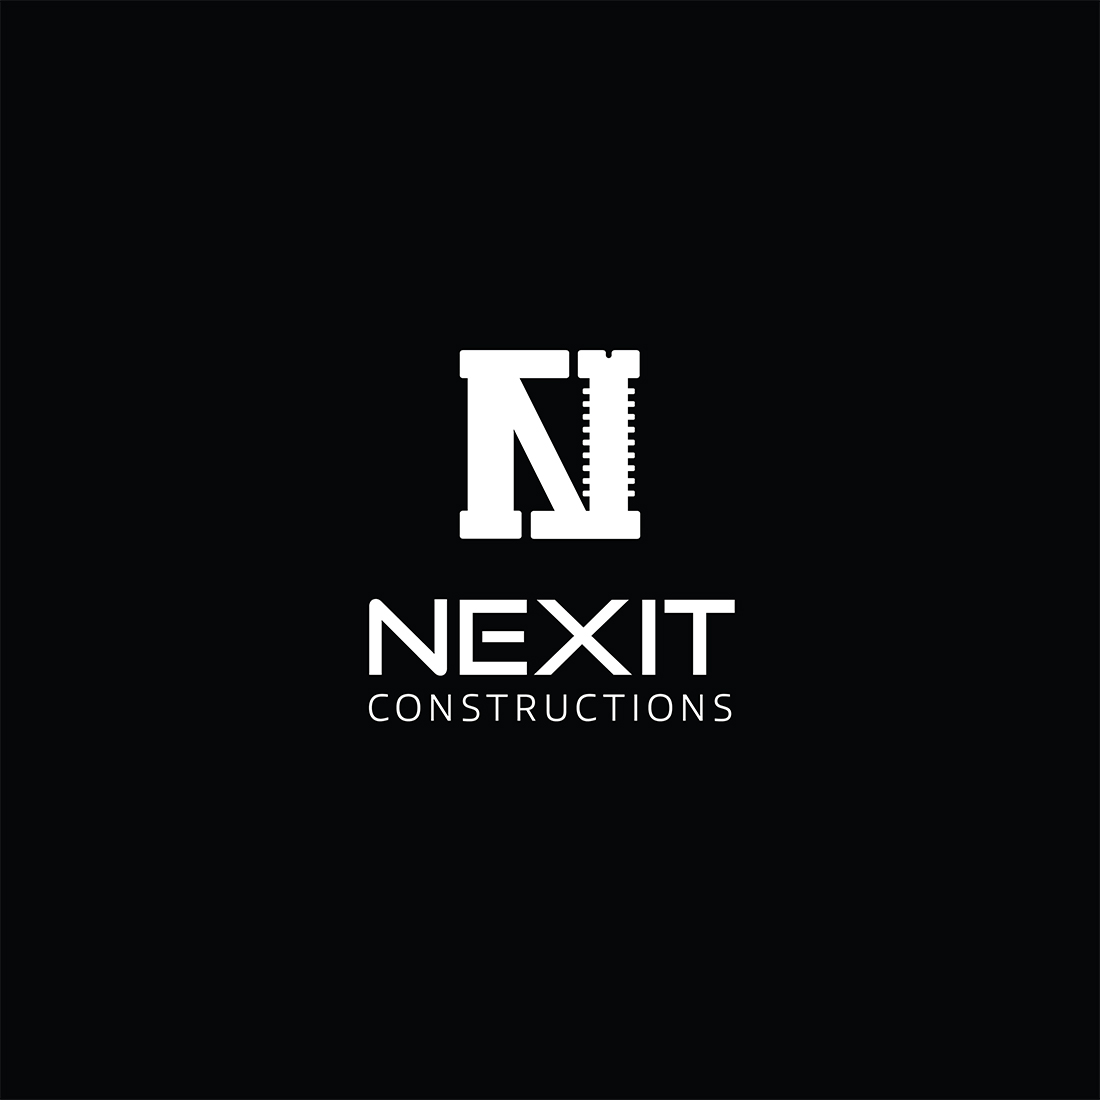 Nexit Constructions Logo with black background.